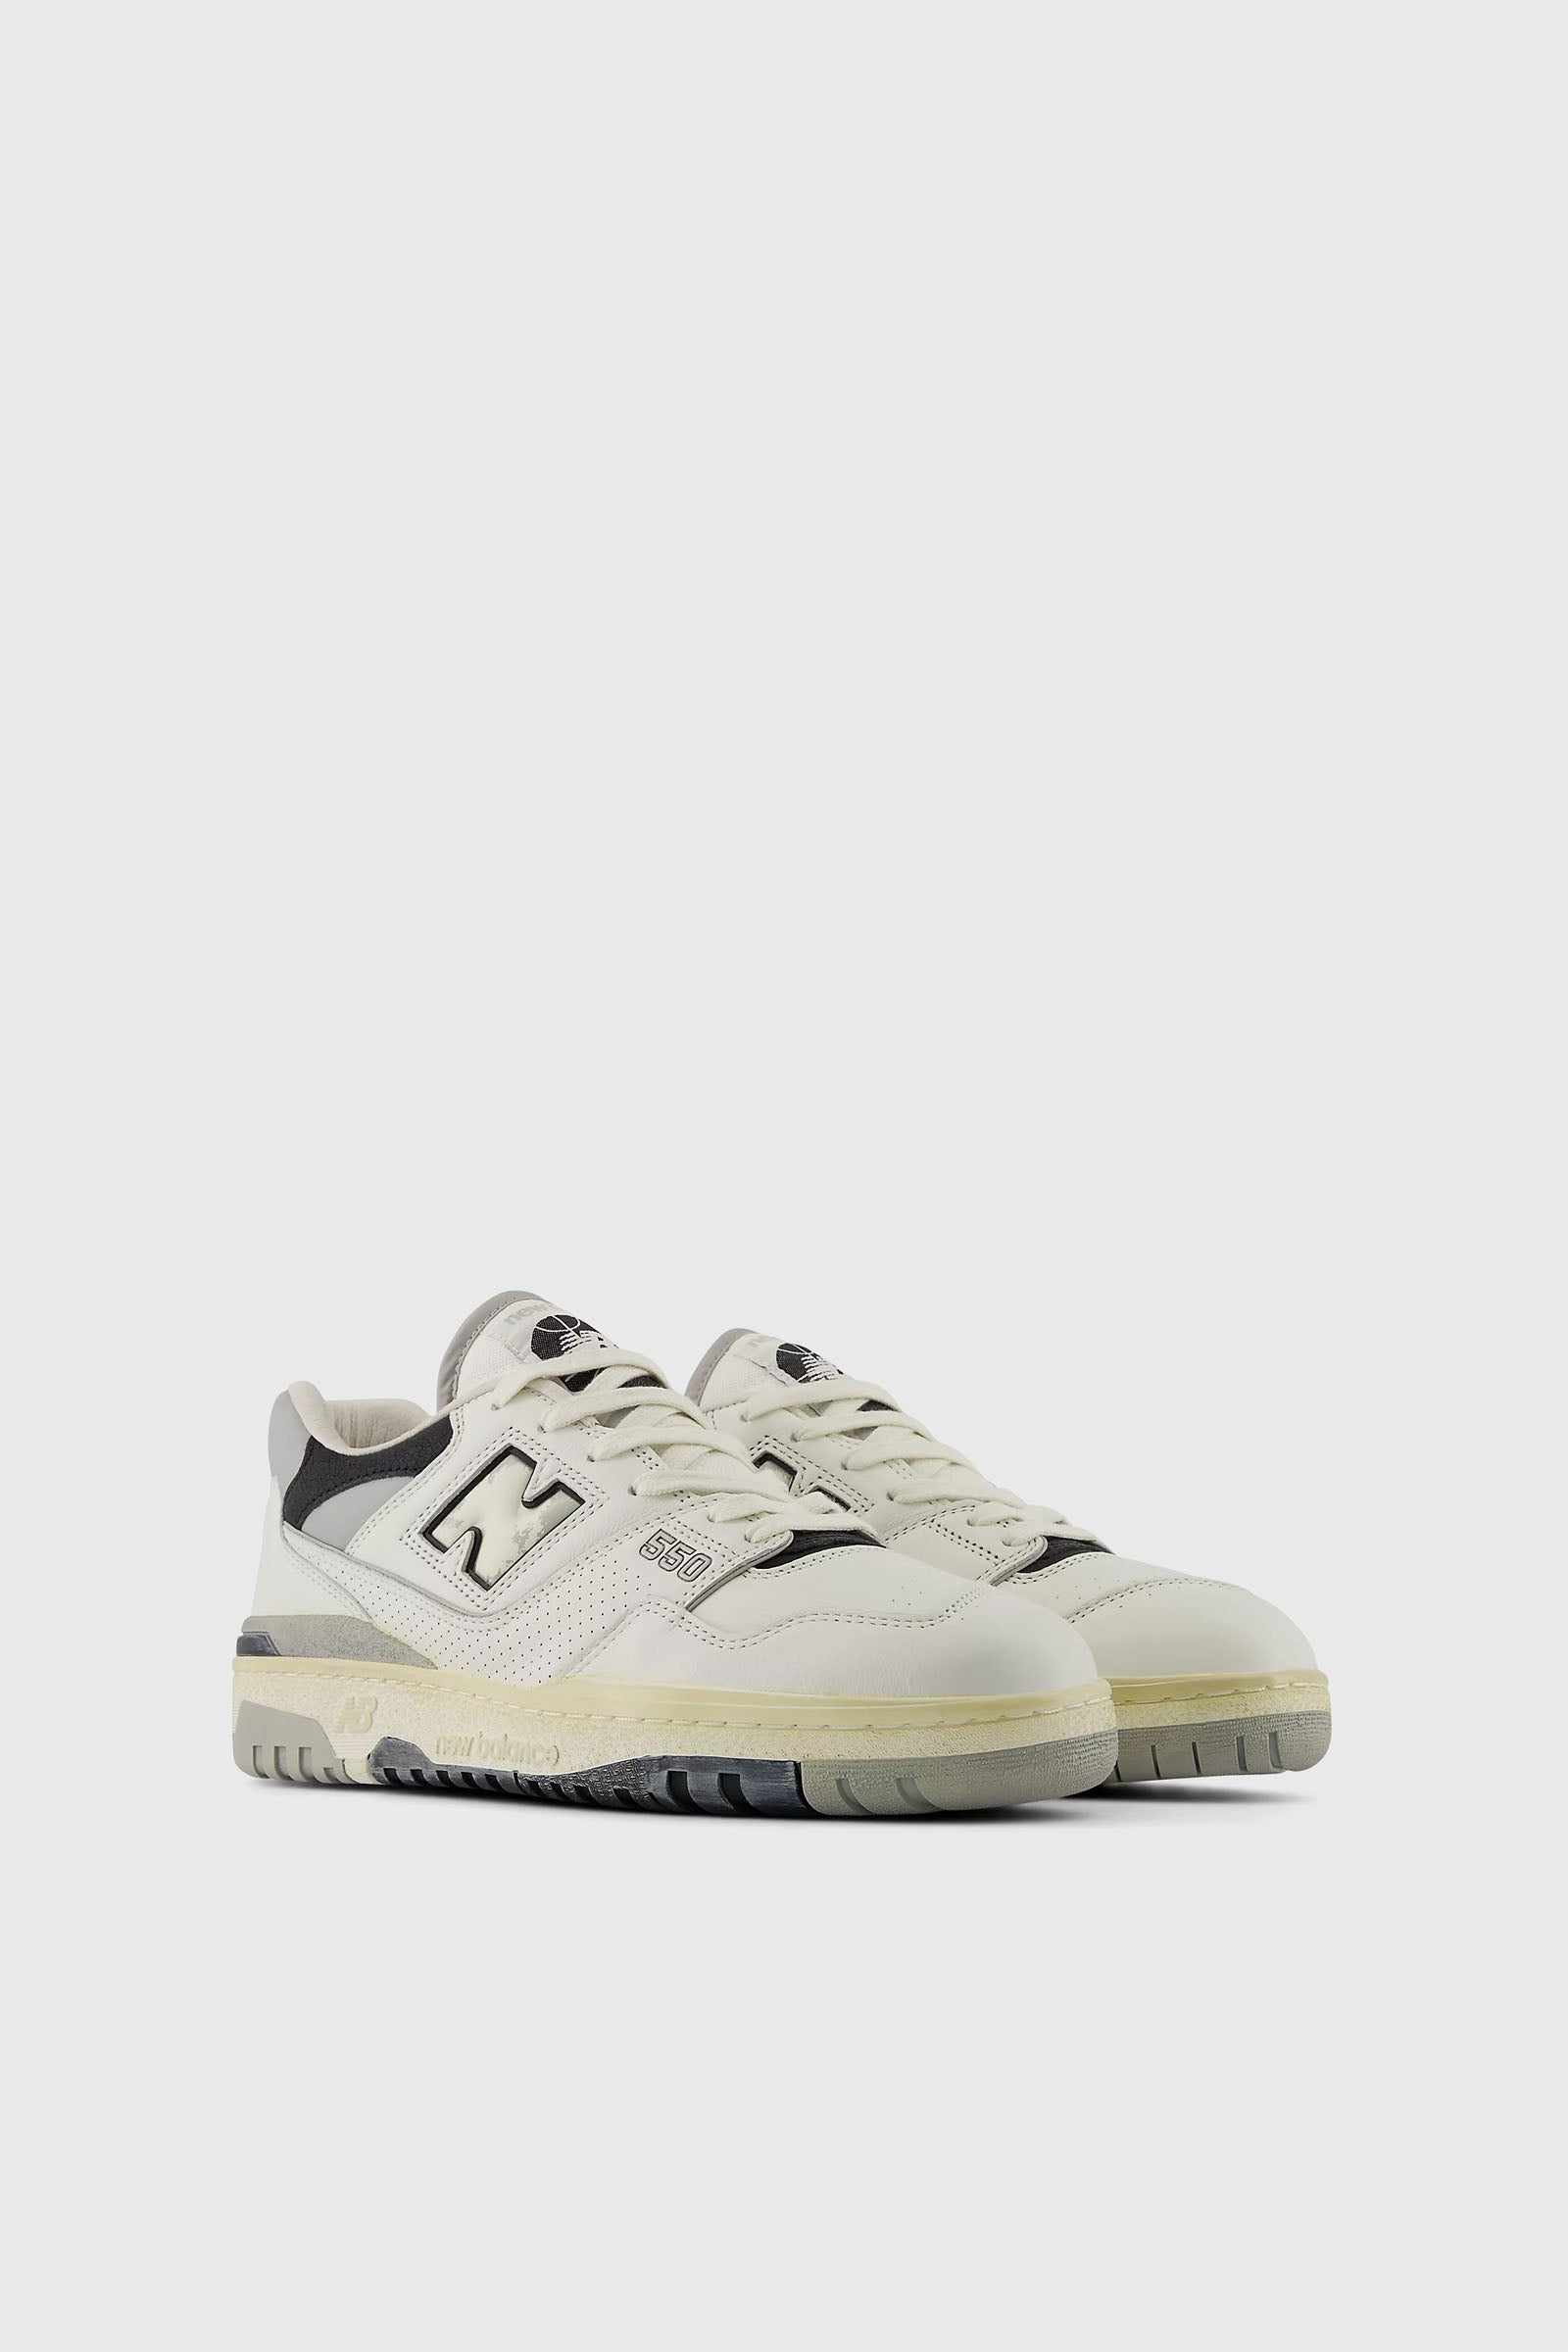 H1 Title: New Balance Sneakers 550 Synthetic White/Grey - 2